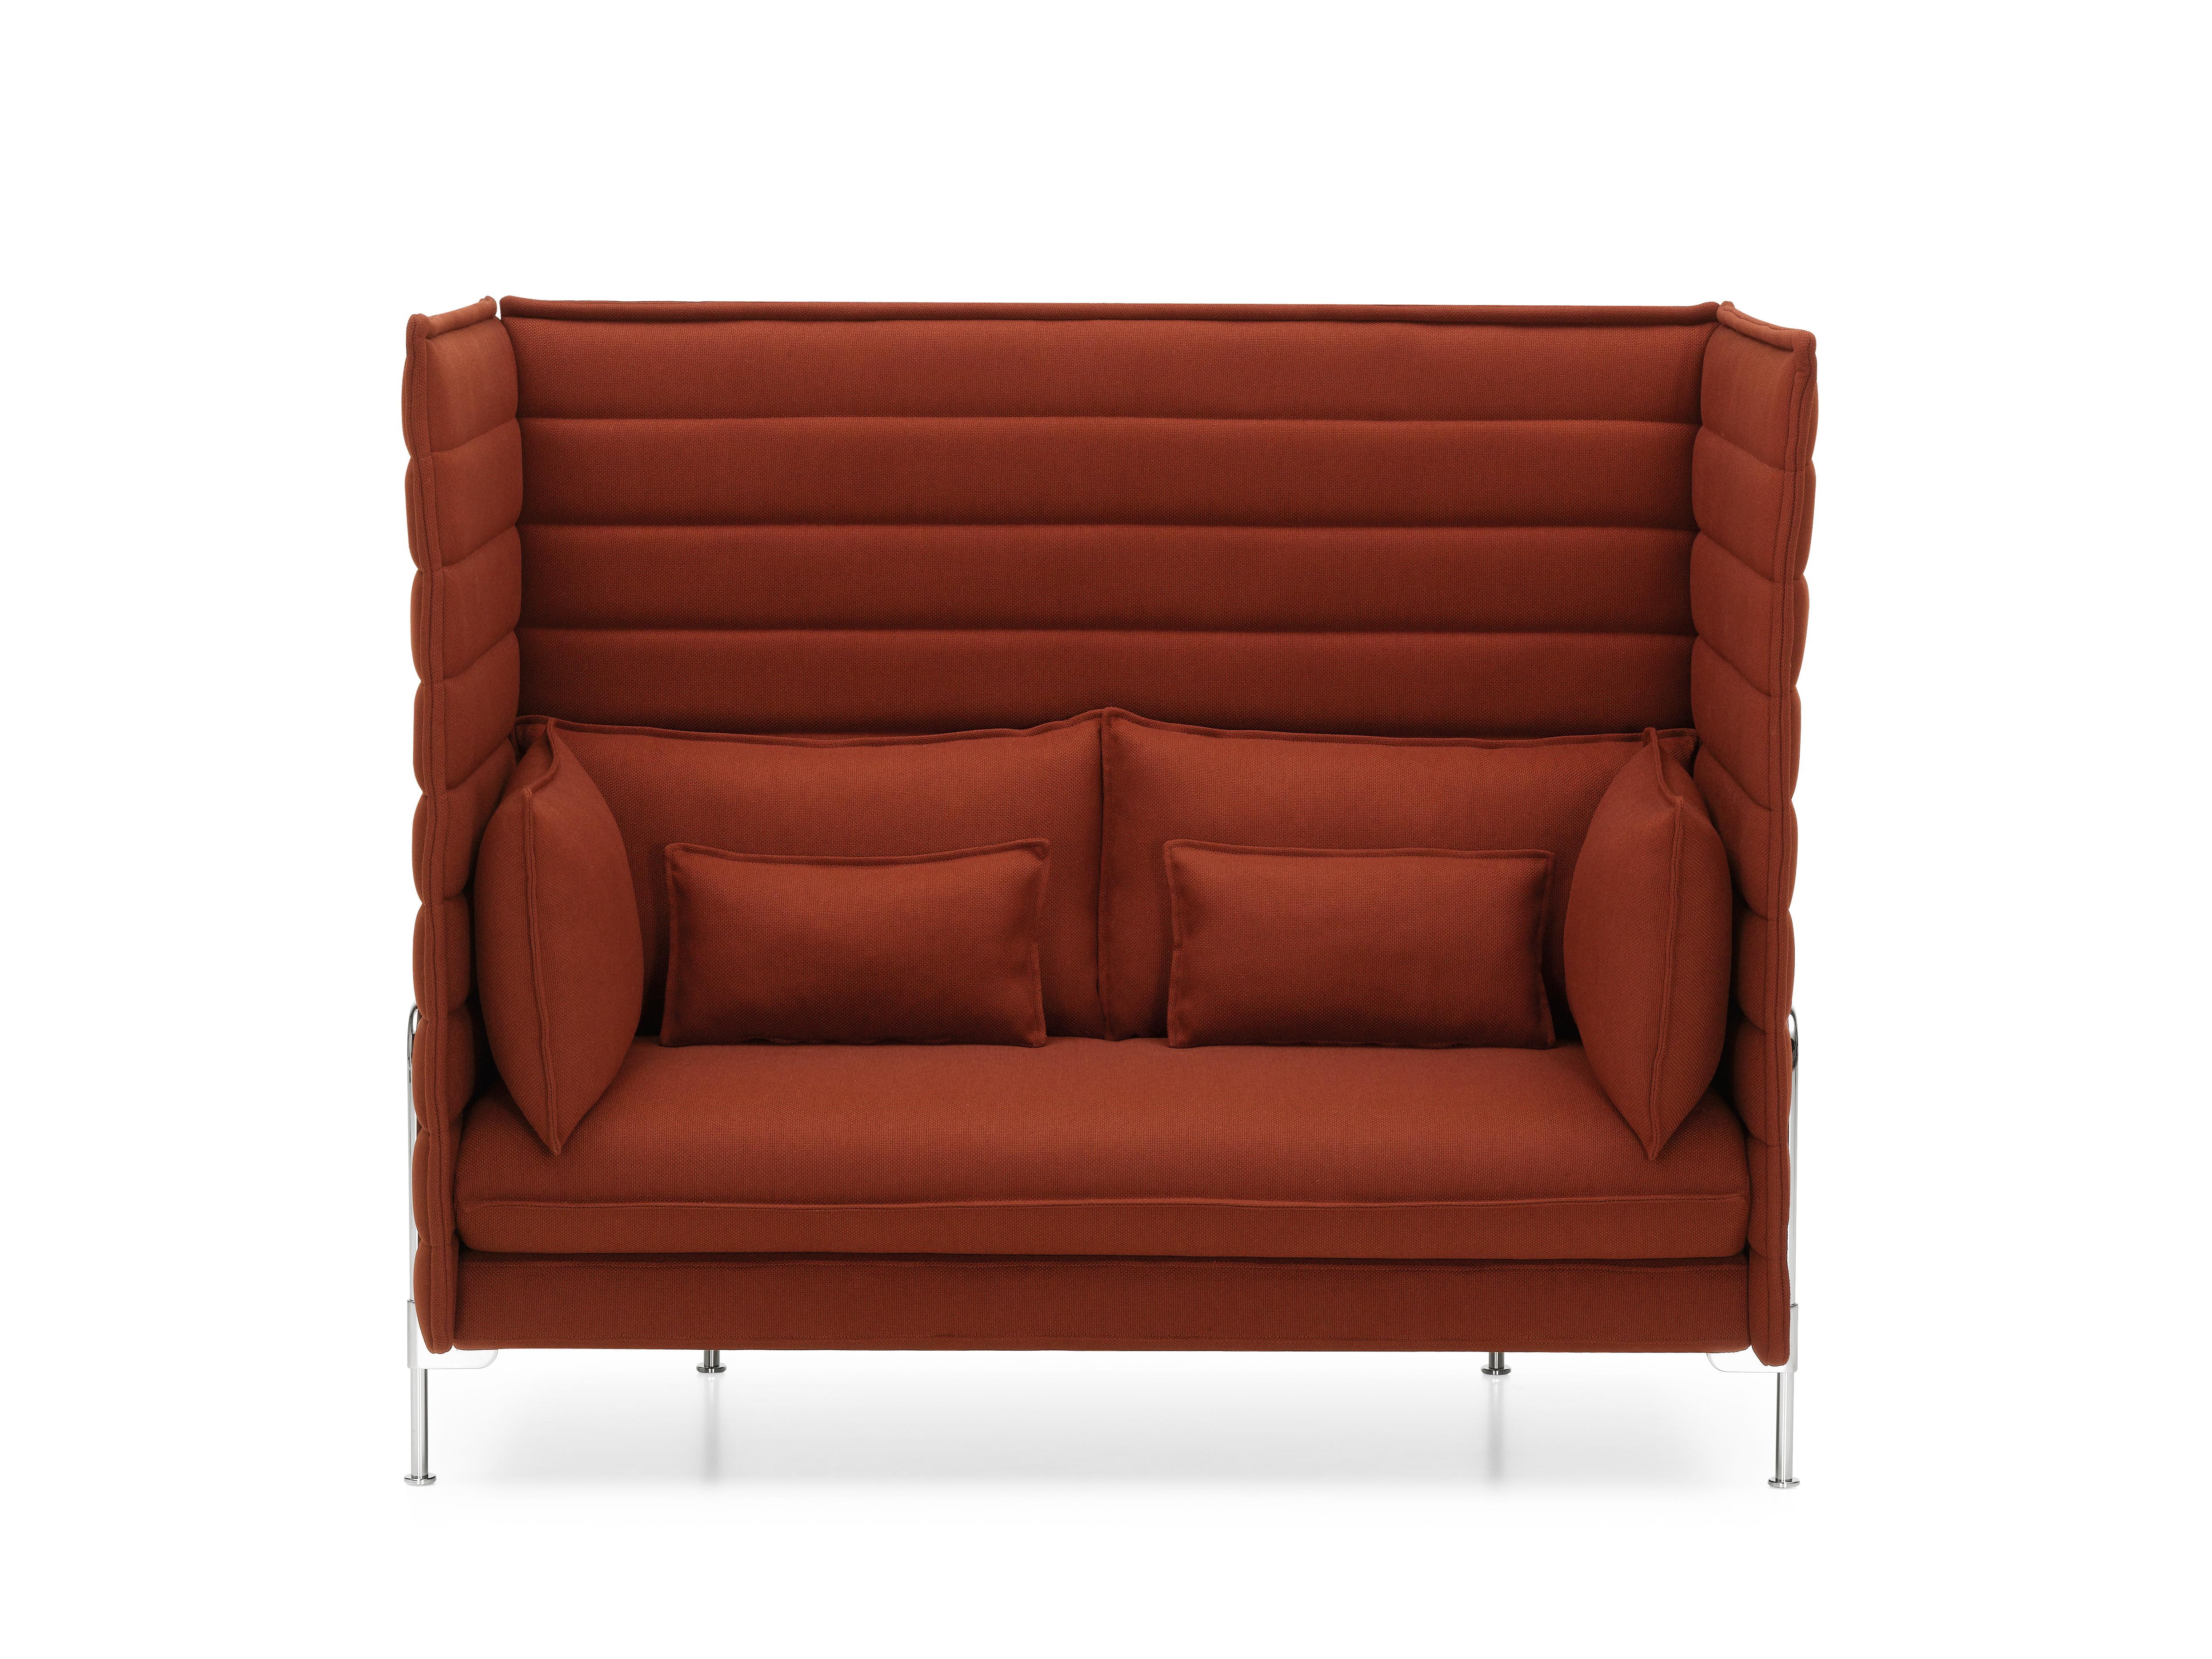 These products are only available in the United States.

A sofa can go beyond being a mere piece of furniture to become a room within a room. This was the idea that inspired Ronan and Erwan Bouroullec in their design of the Alcove sofa. With its